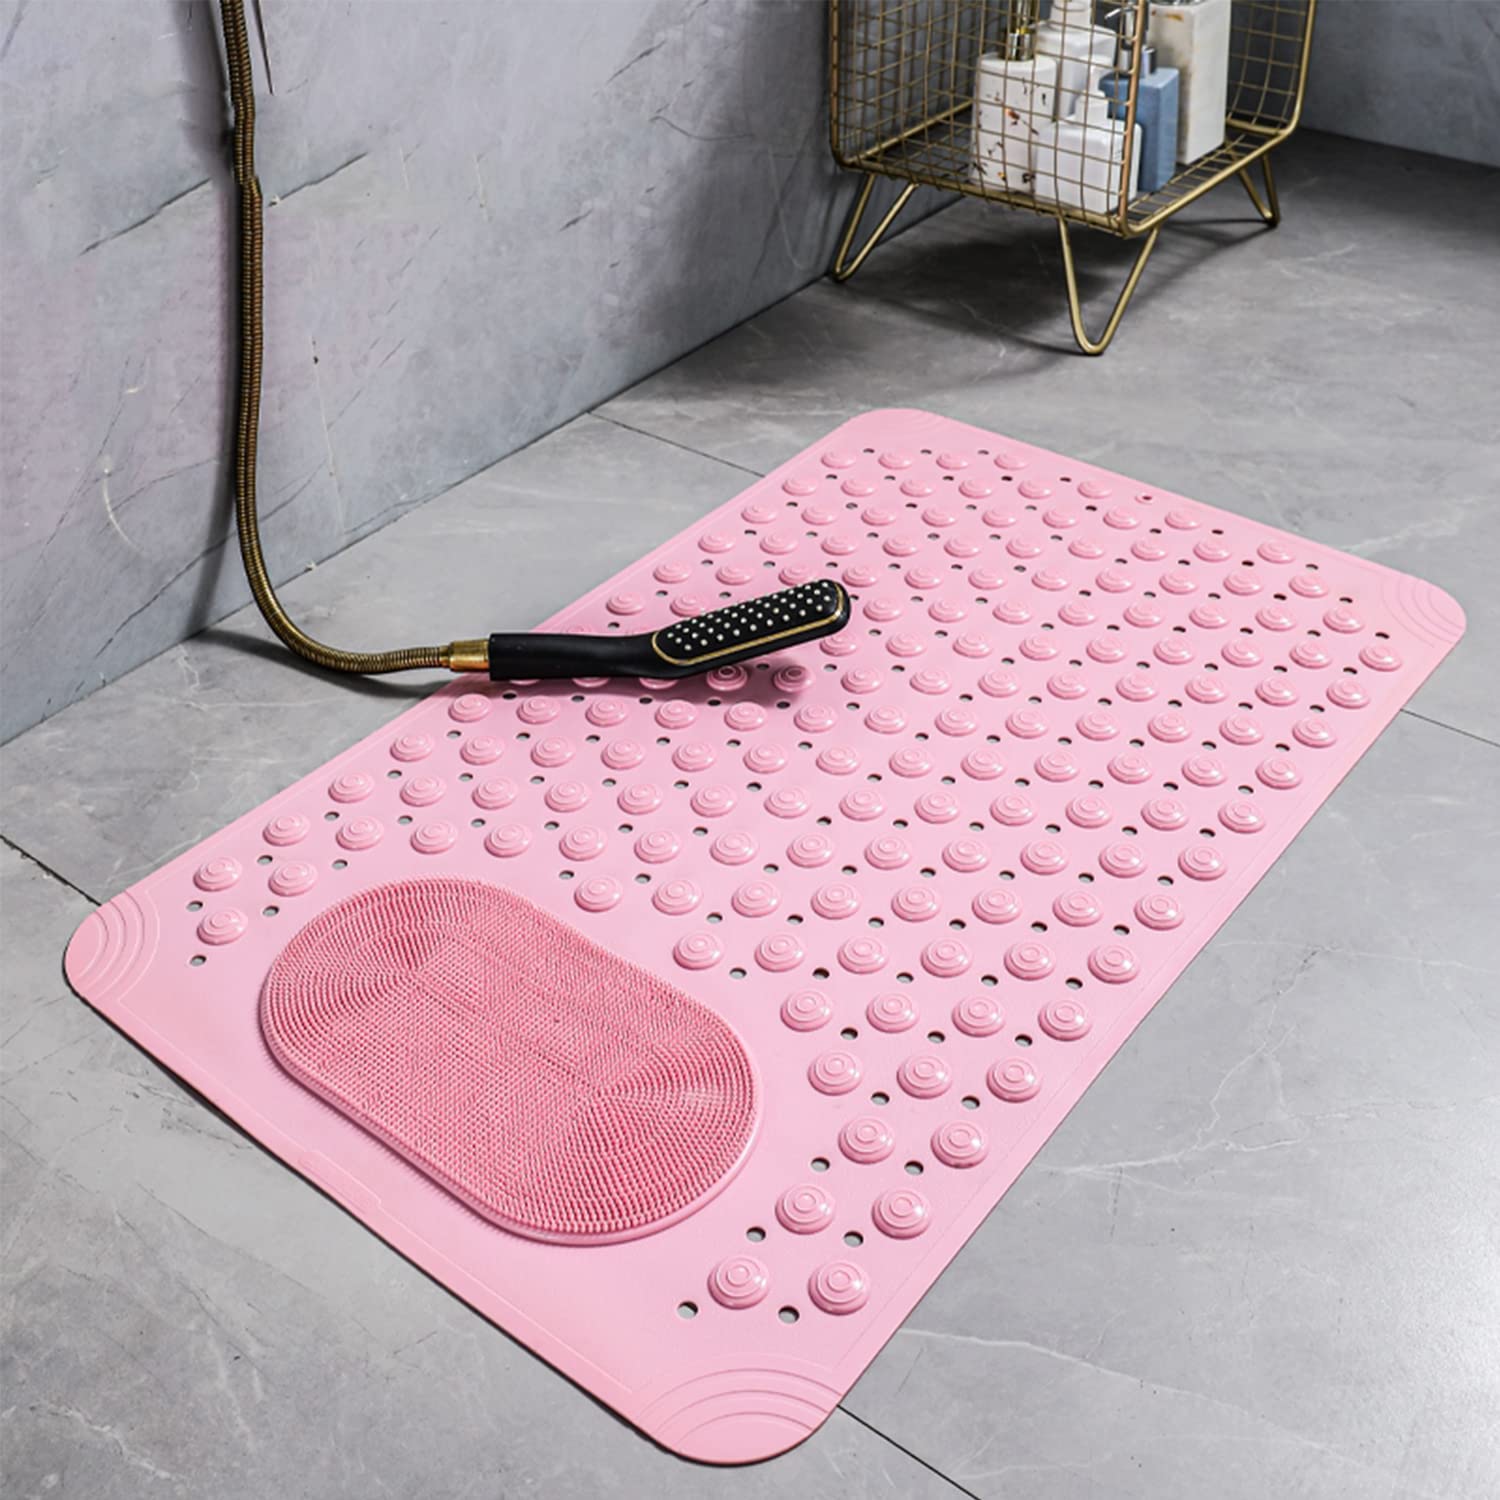 Silicone Foot Massage Cushion, Slip Resistant Shower Mats